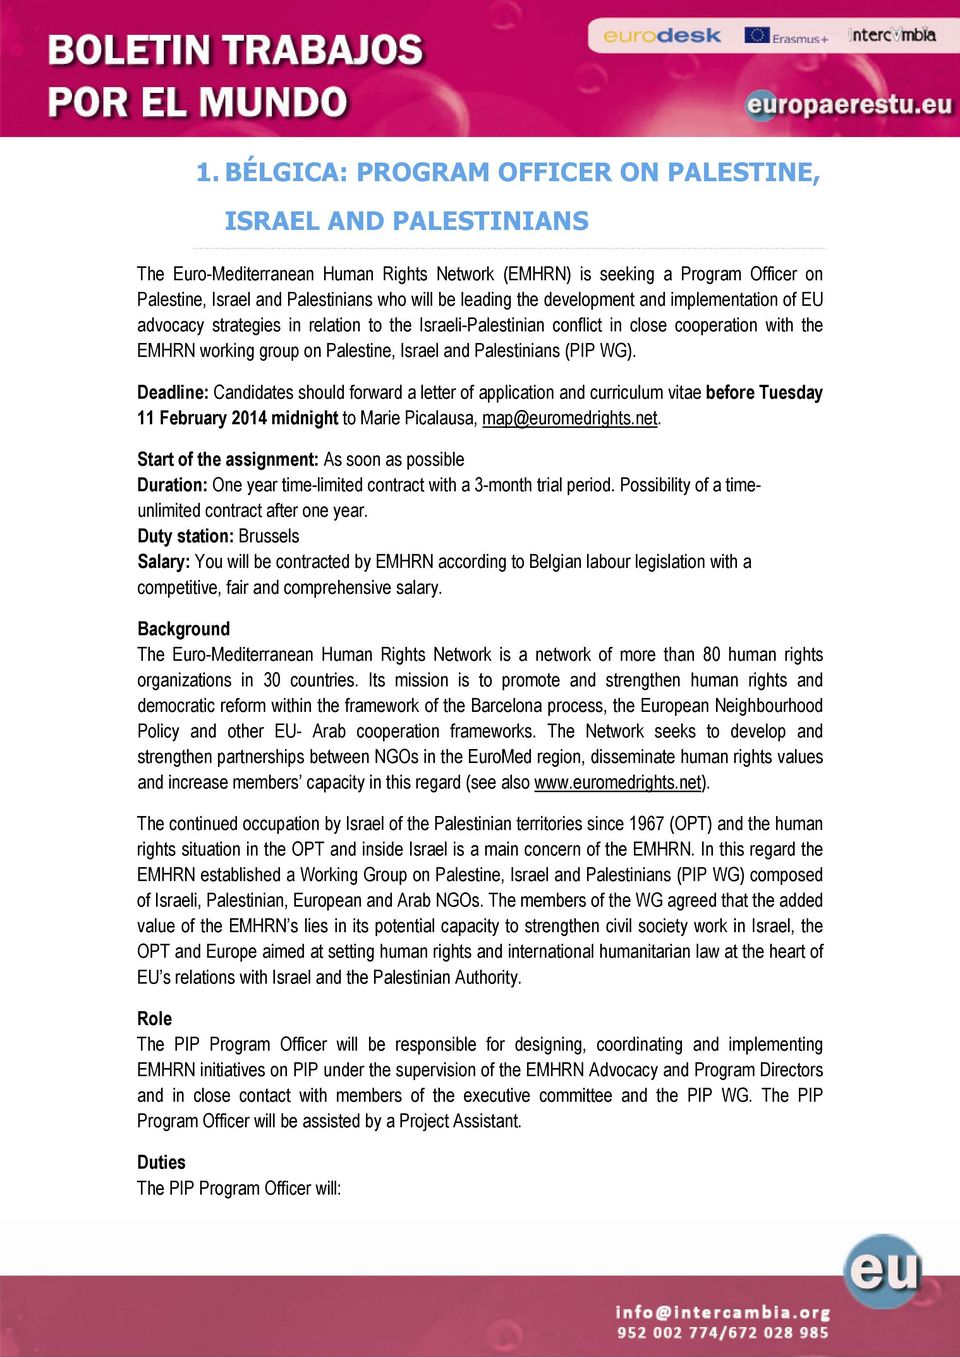 Palestinians (PIP WG). Deadline: Candidates should forward a letter of application and curriculum vitae before Tuesday 11 February 2014 midnight to Marie Picalausa, map@euromedrights.net.